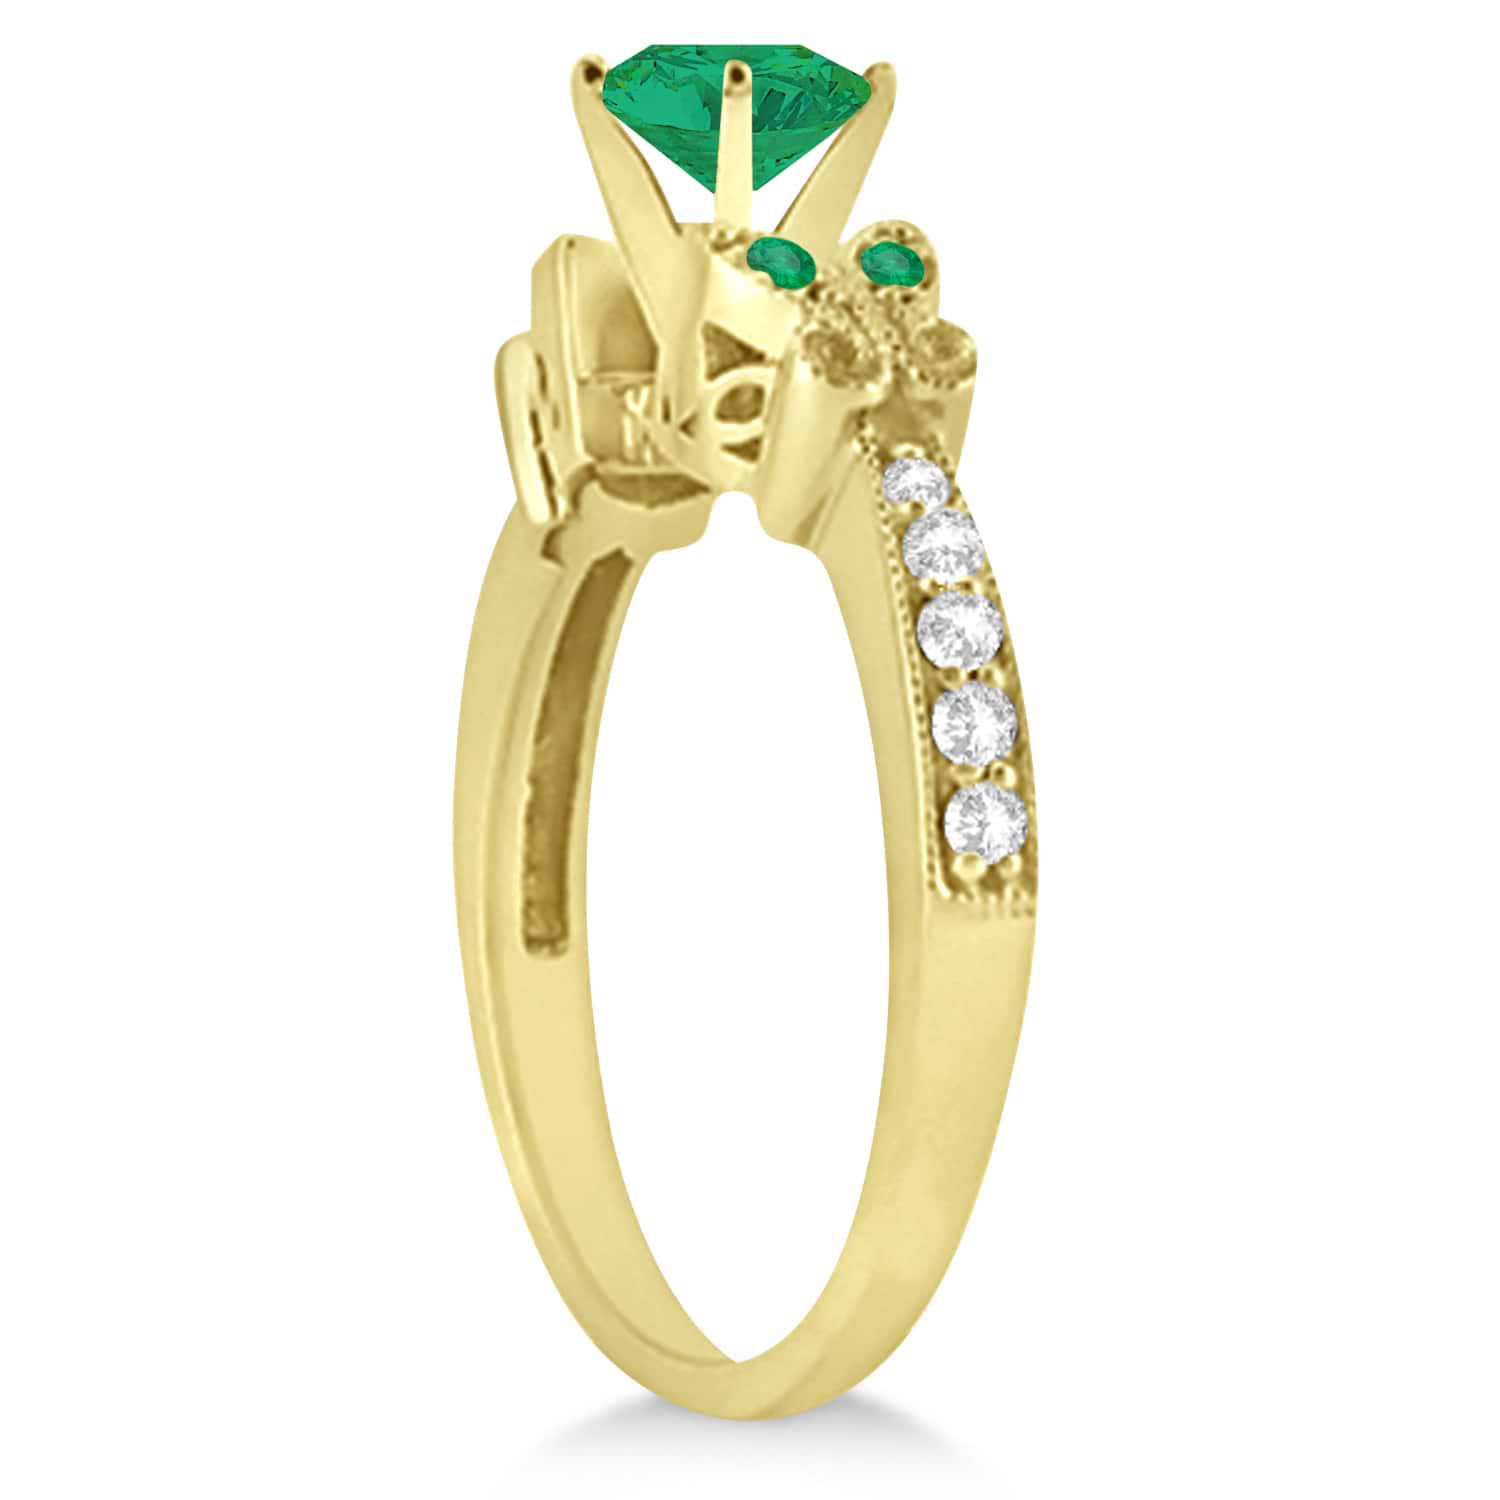 Butterfly Genuine Emerald & Diamond Engagement Ring 18K Yellow Gold (1.91ct)